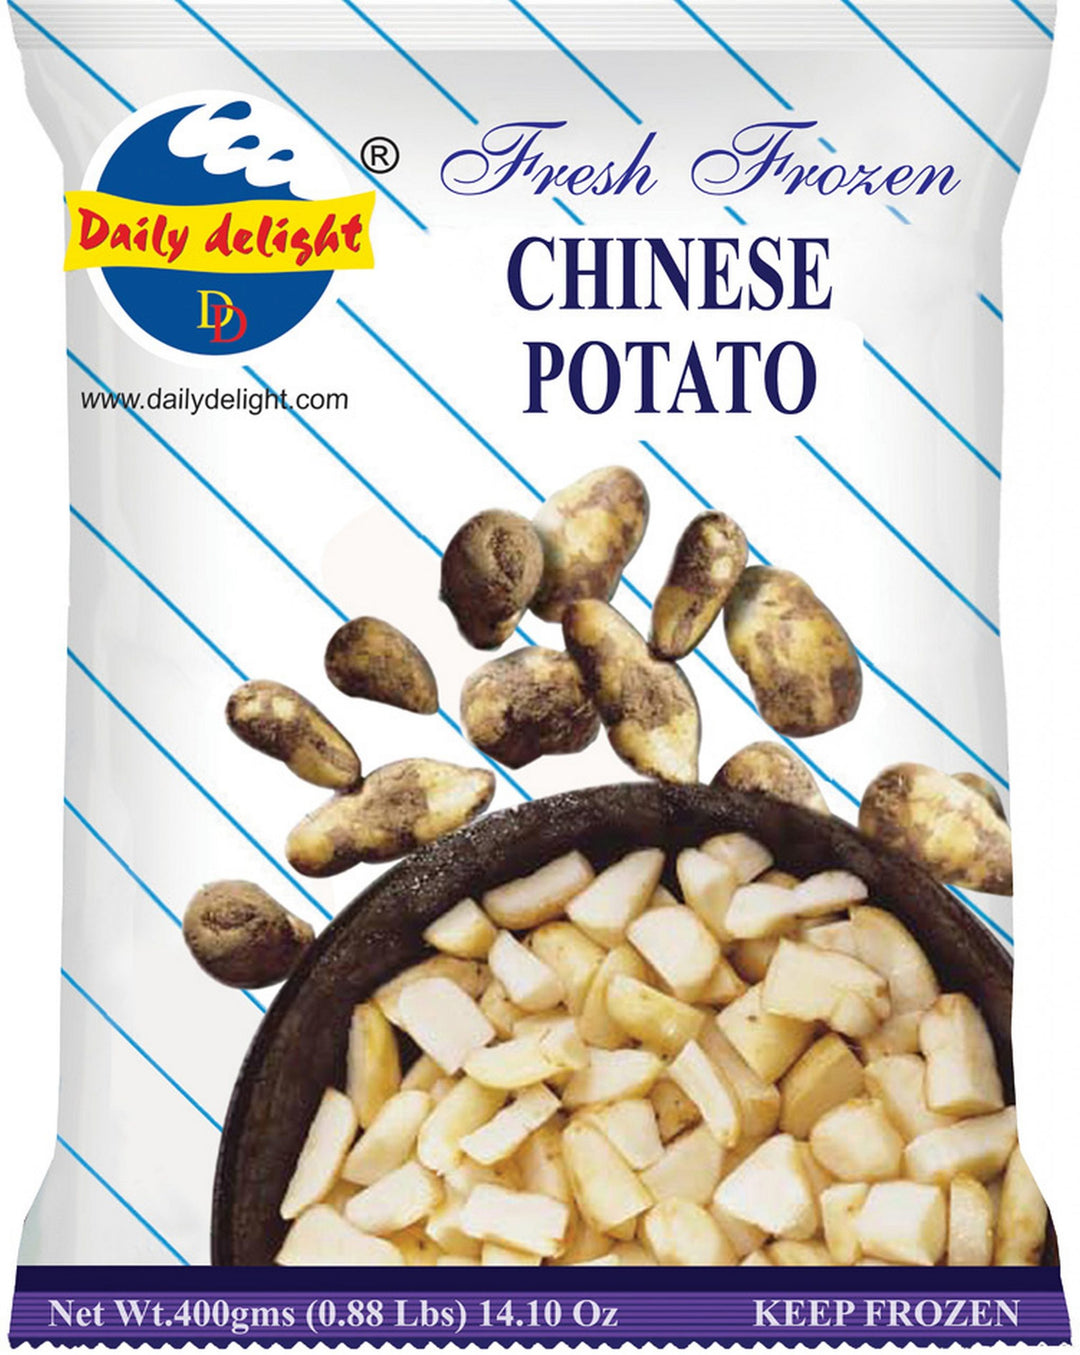 Daily Delight Chinese Potato 400G Frozen